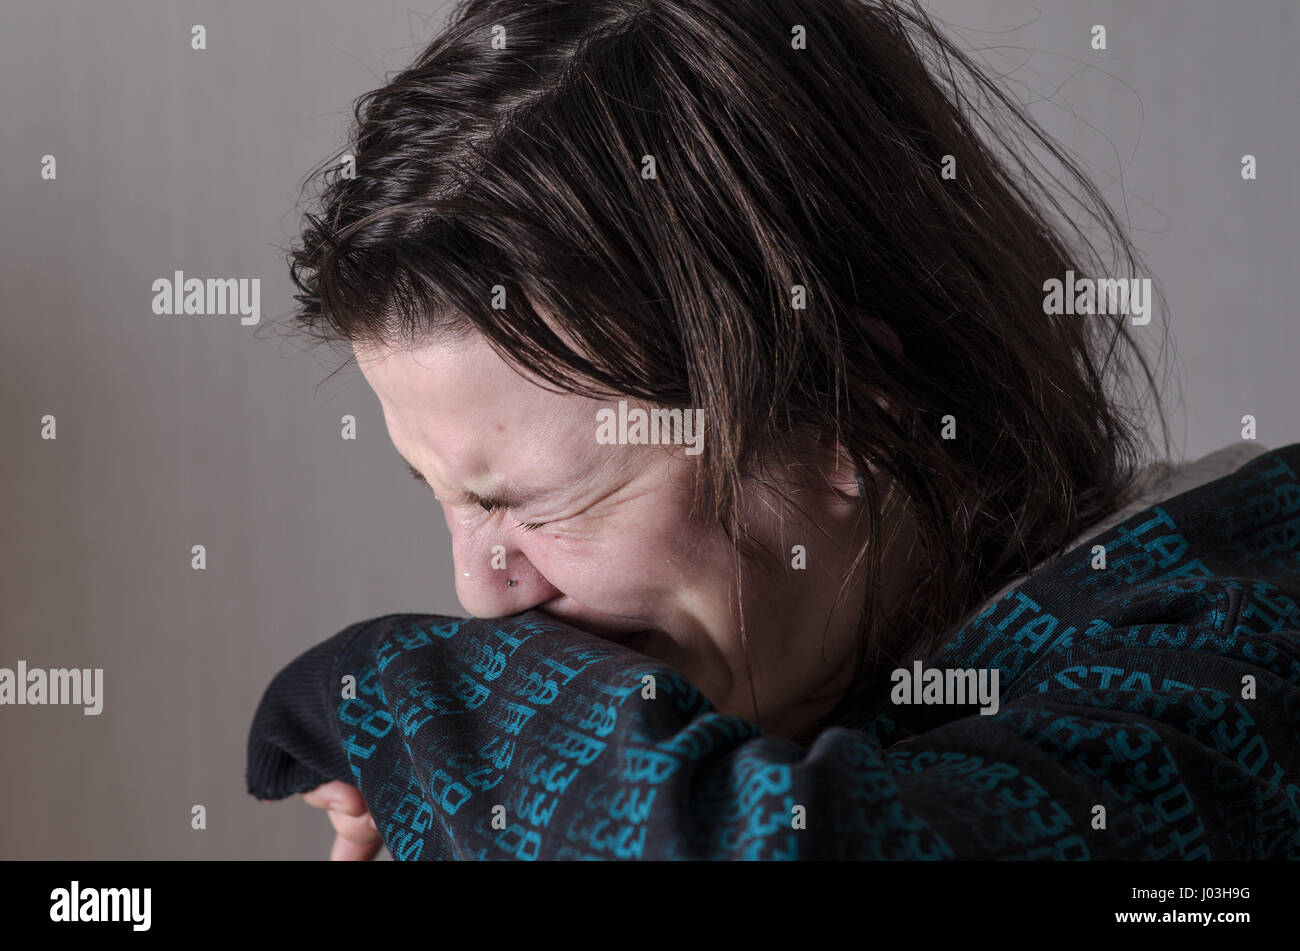 Girl crying in despair. Grief and real emotions. Stock Photo